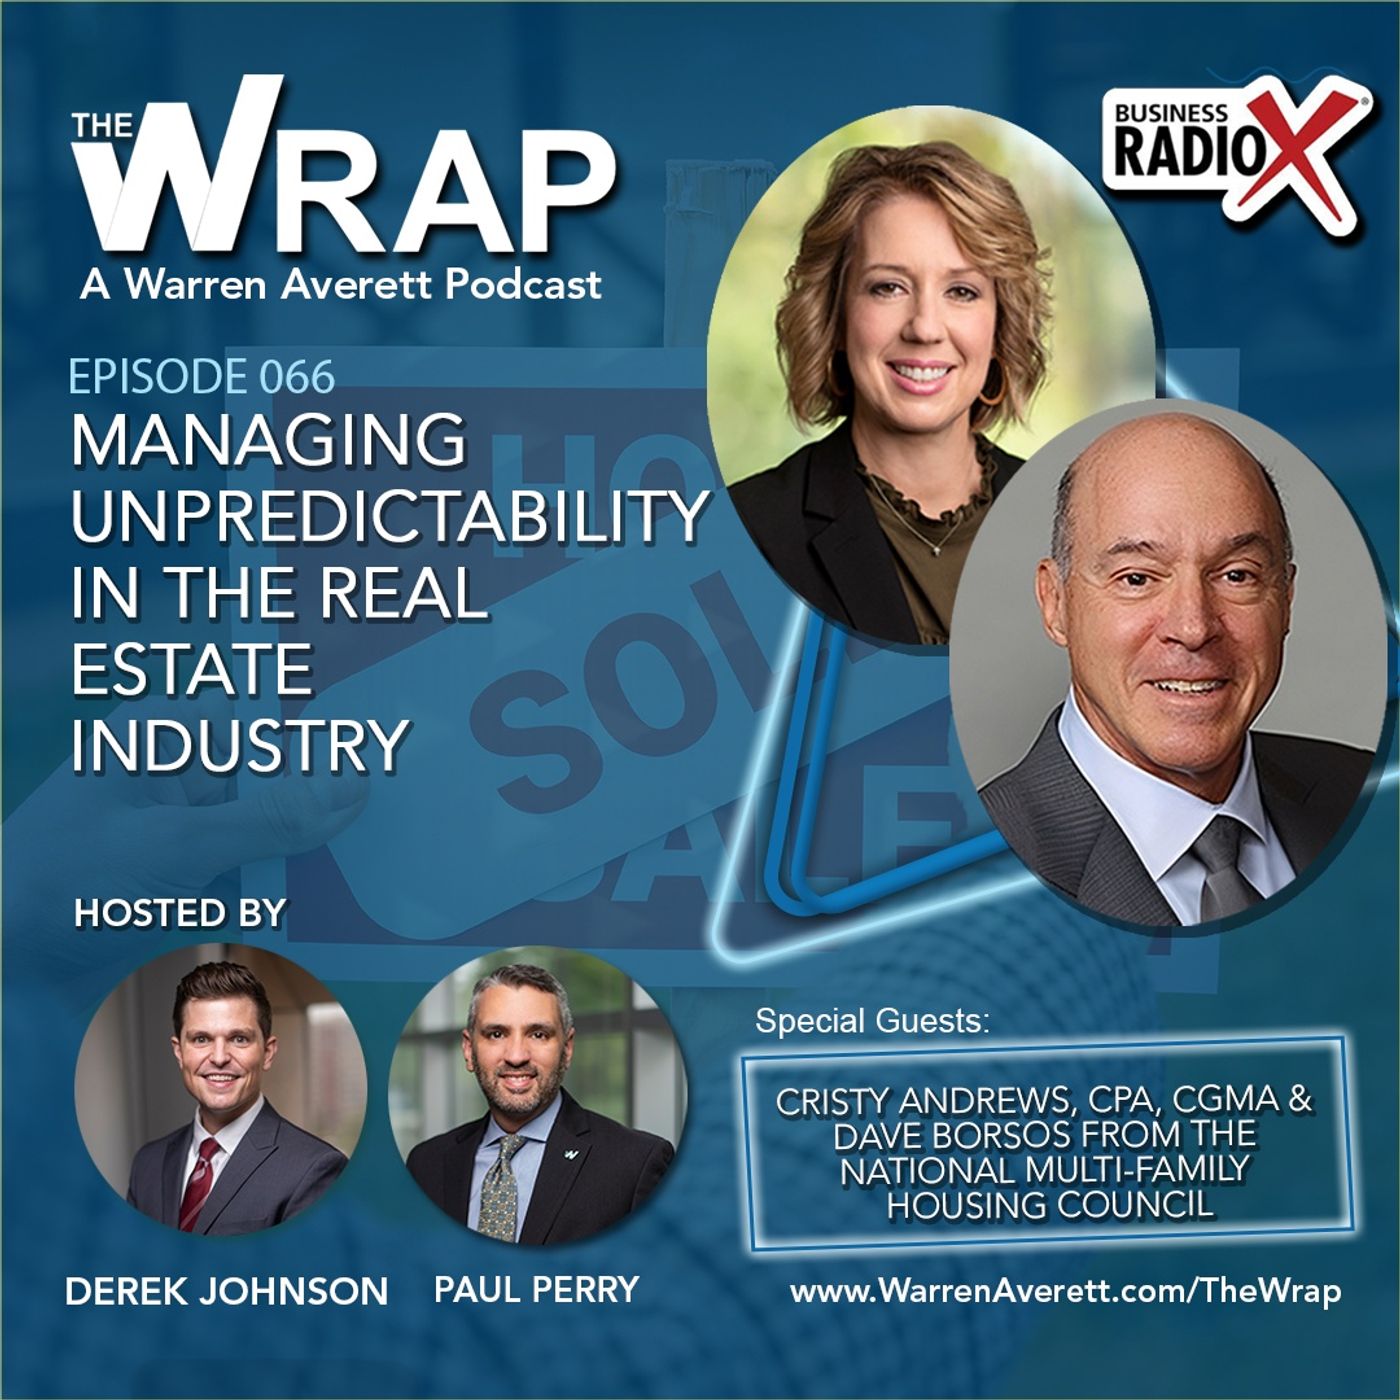 The Wrap Podcast | Episode 066 | Managing Unpredictability in the Real Estate Industry | Warren Averett